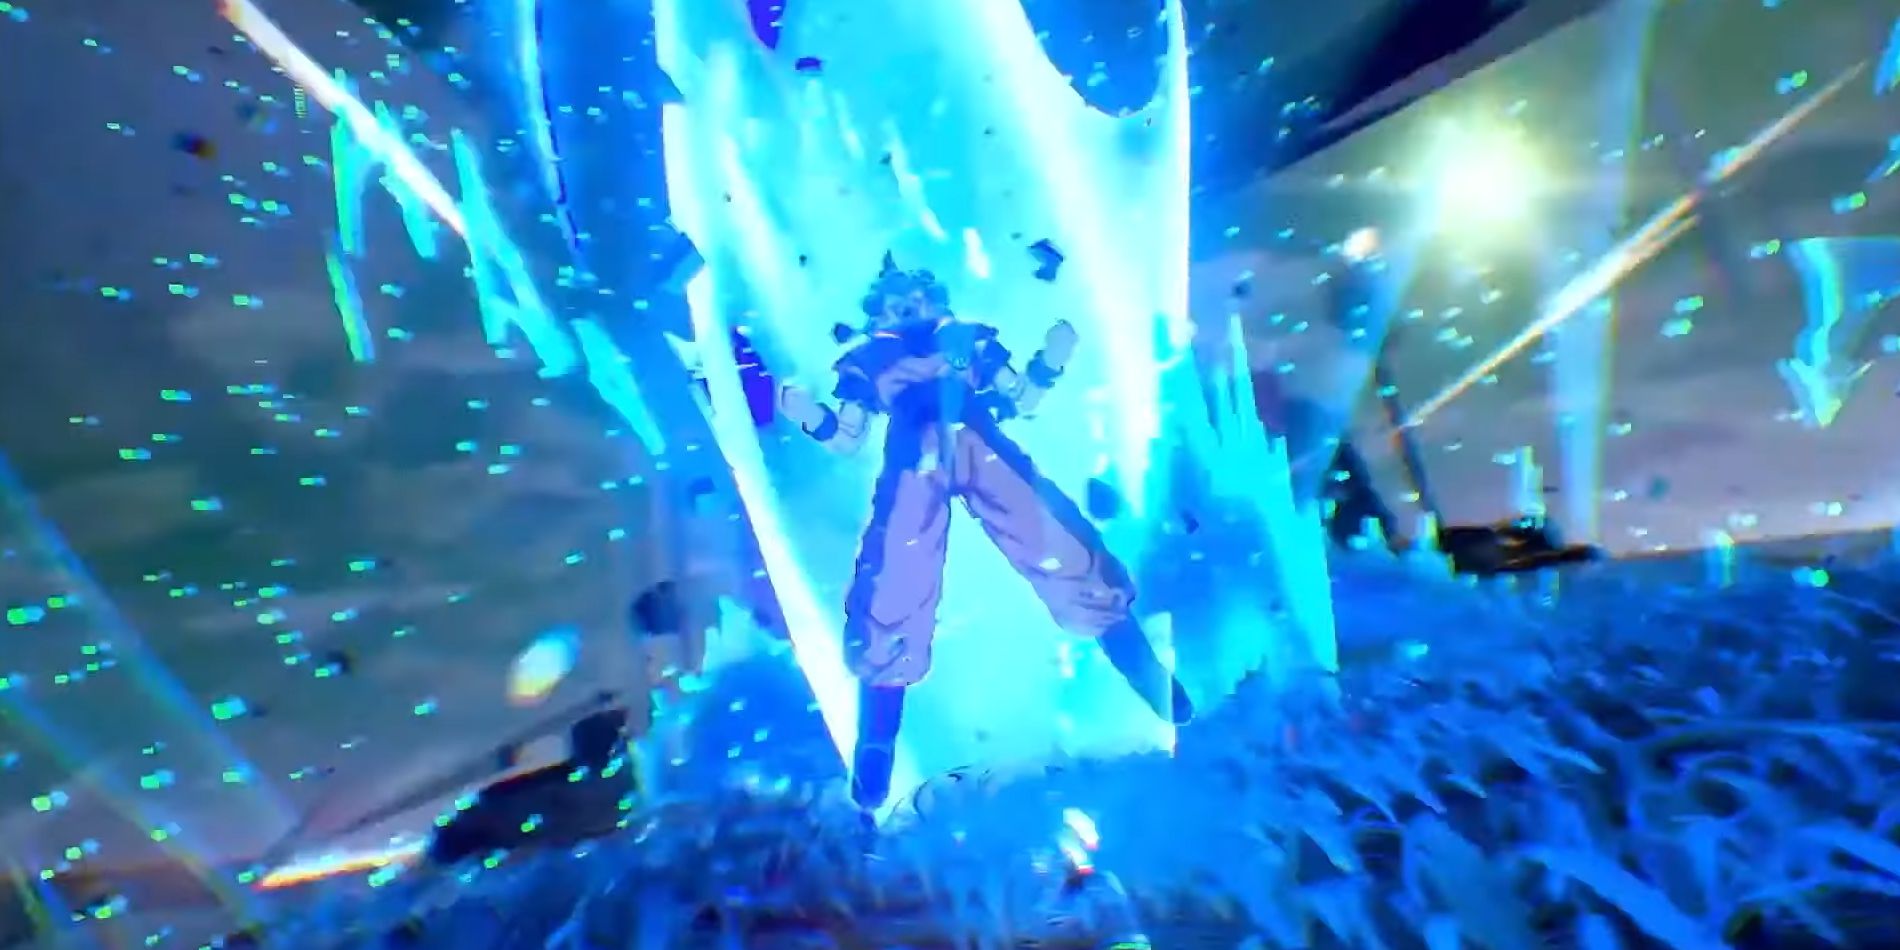 Dragon Ball main character Goku is seen powering up to his Super Saiyan Blue form with blue aura's exploding from him while light reflects around him transforming on a blue grassy plain.